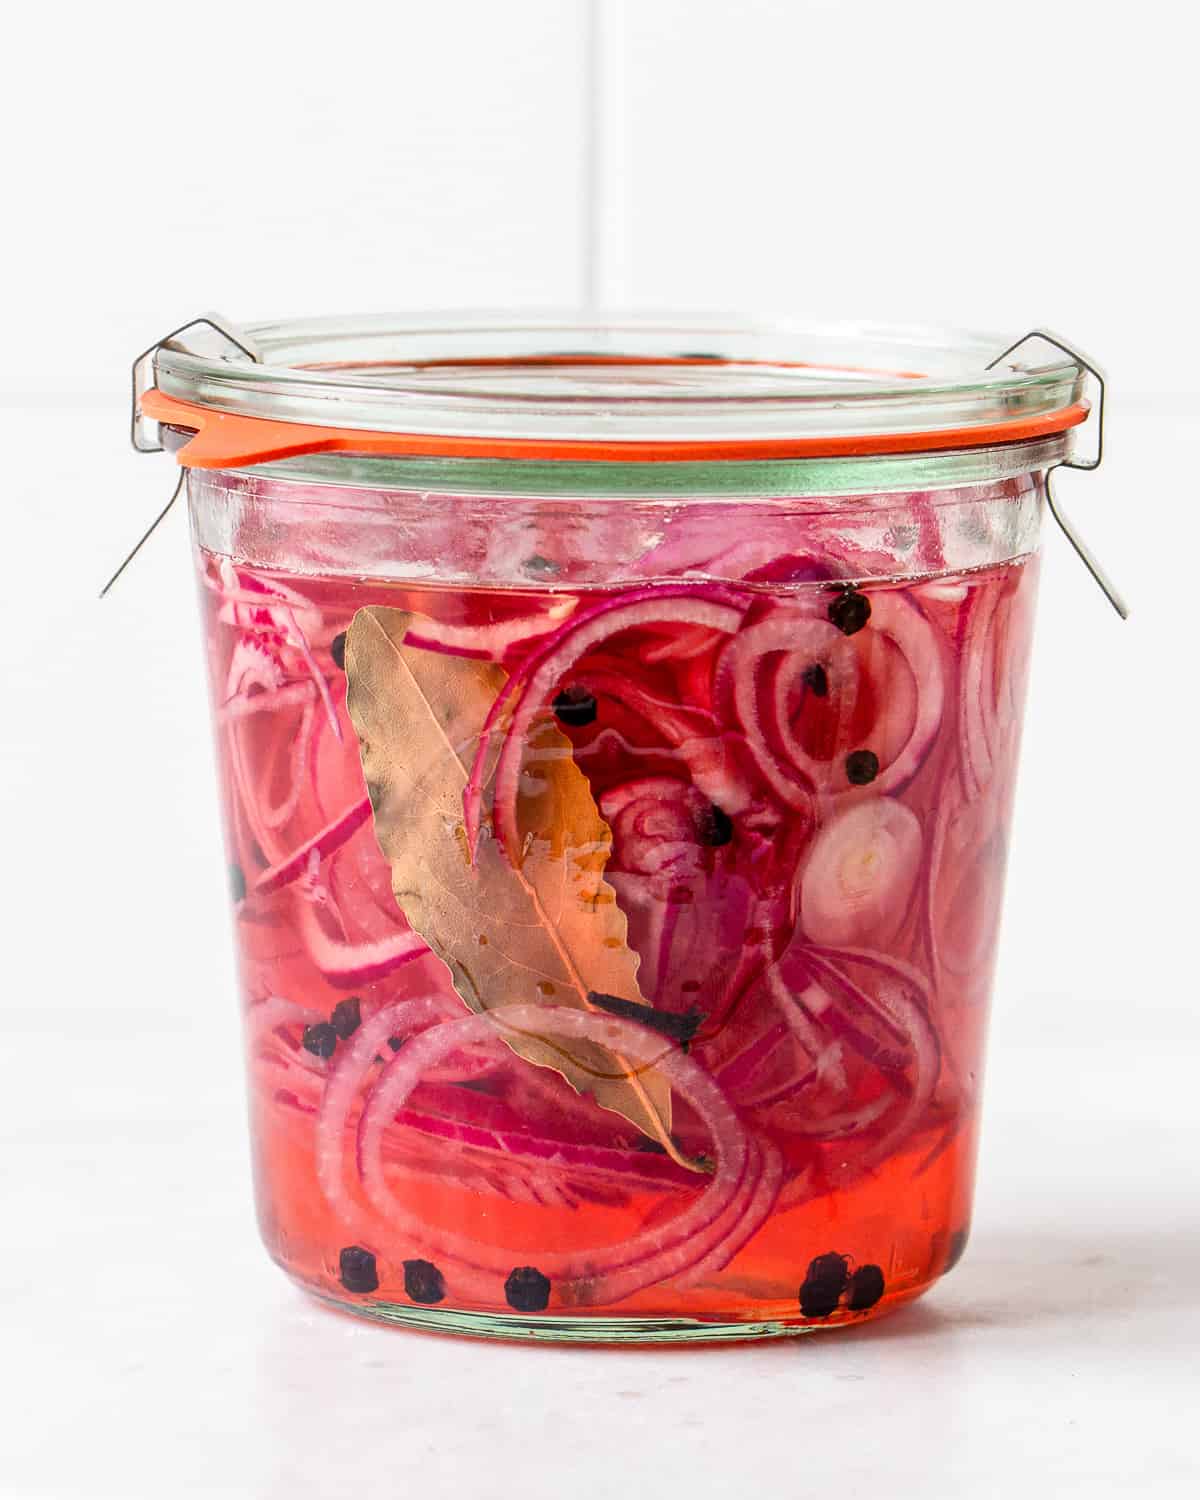 Sliced red onions in vinegar brine with spices in a glass jar.